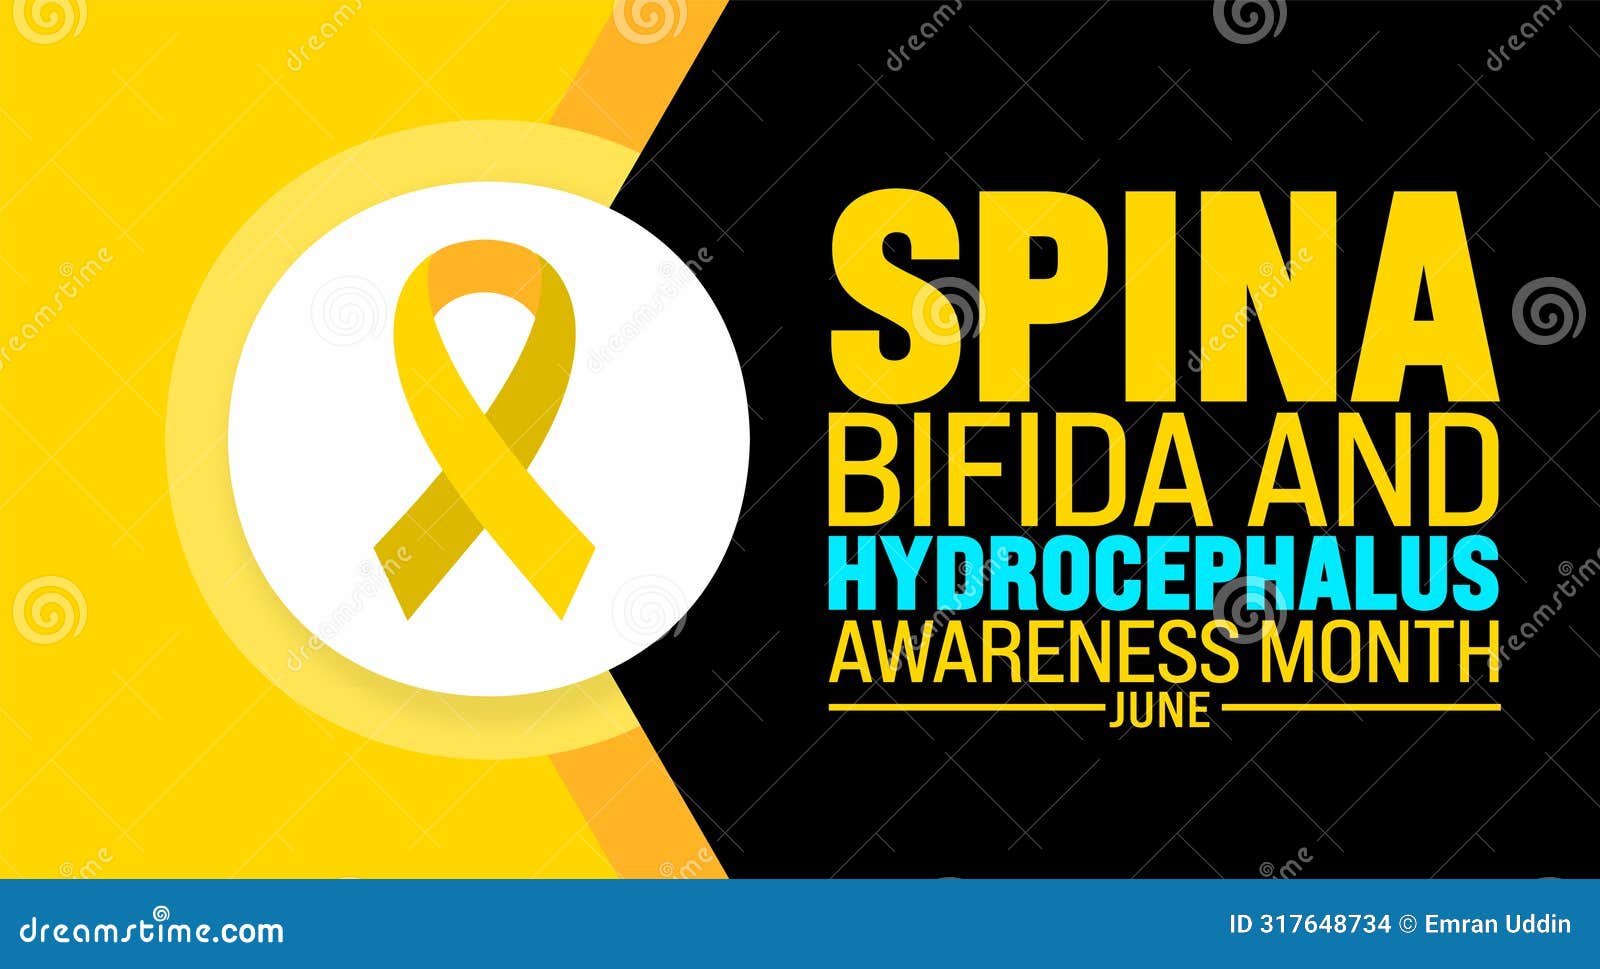 june is spina bifida and hydrocephalus awareness month background template. holiday concept.